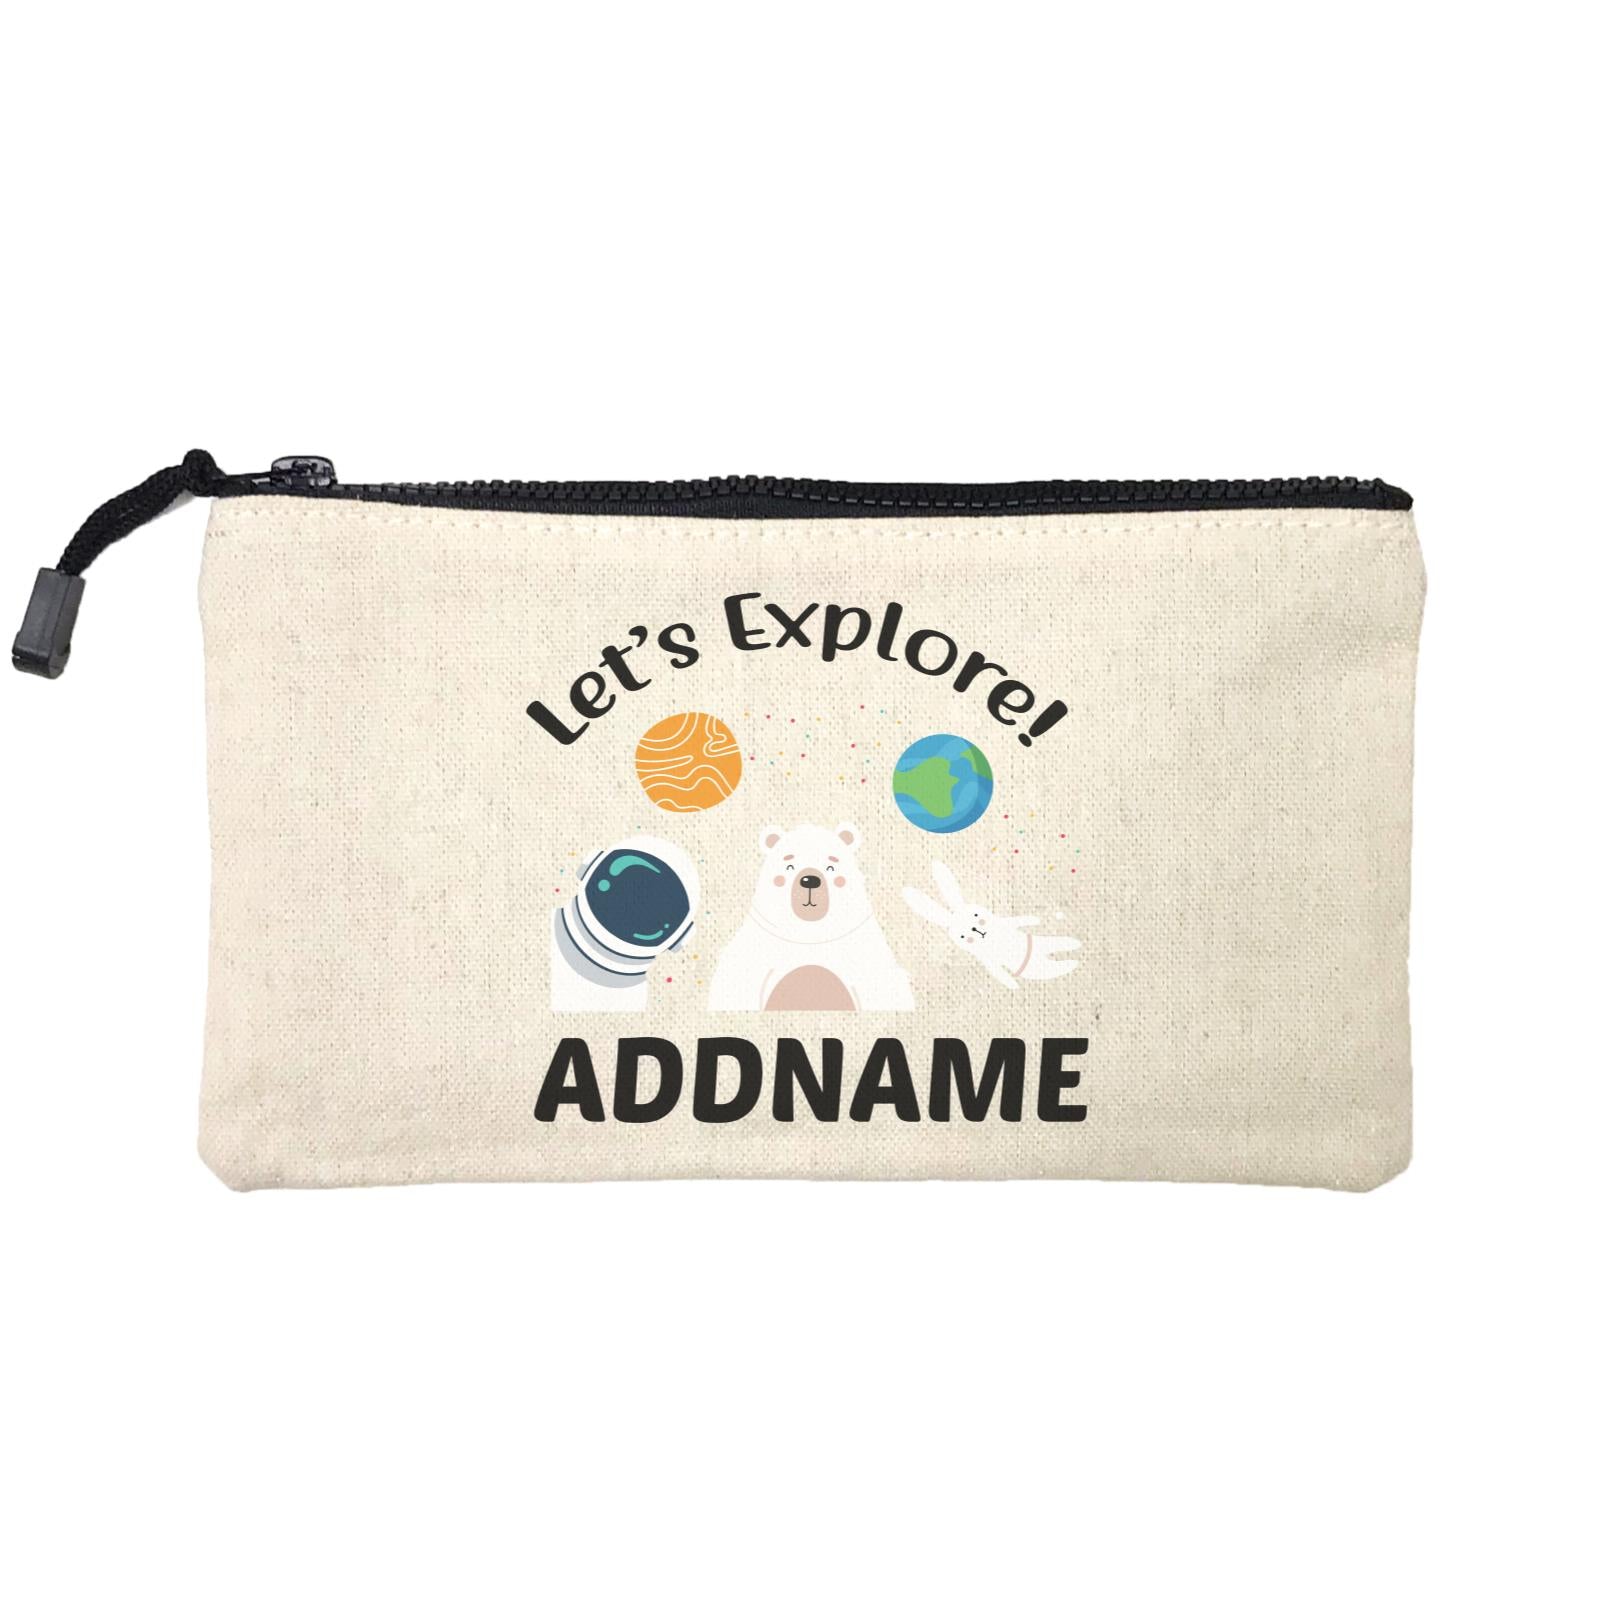 Let's Explore Addname SP Stationery Pouch